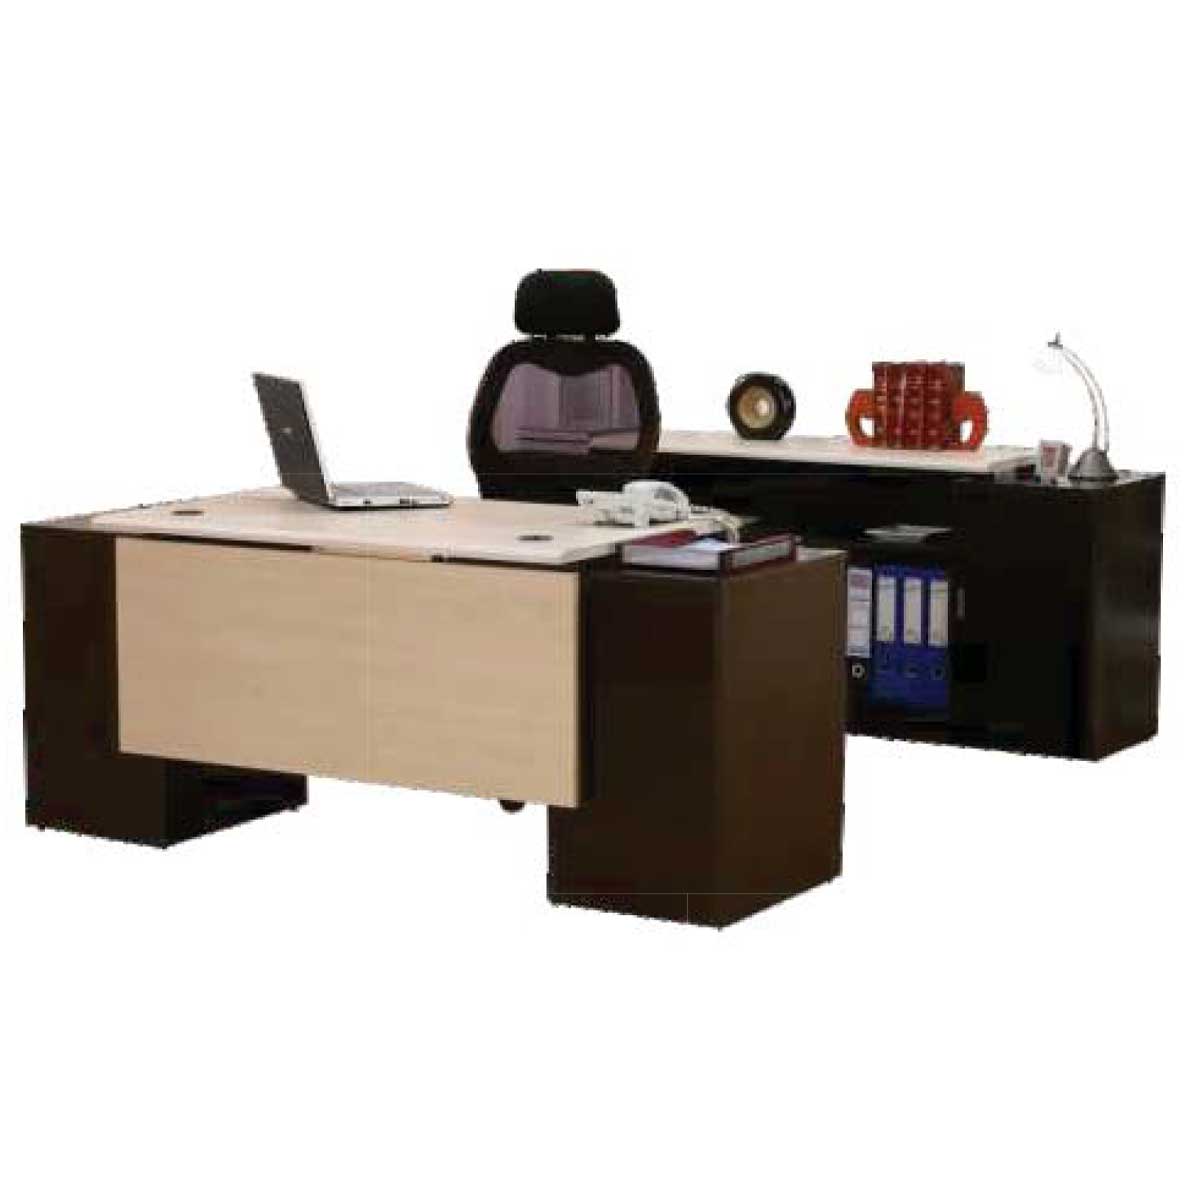 Executive Office Table Manufacturers, Suppliers in Greater Kailash